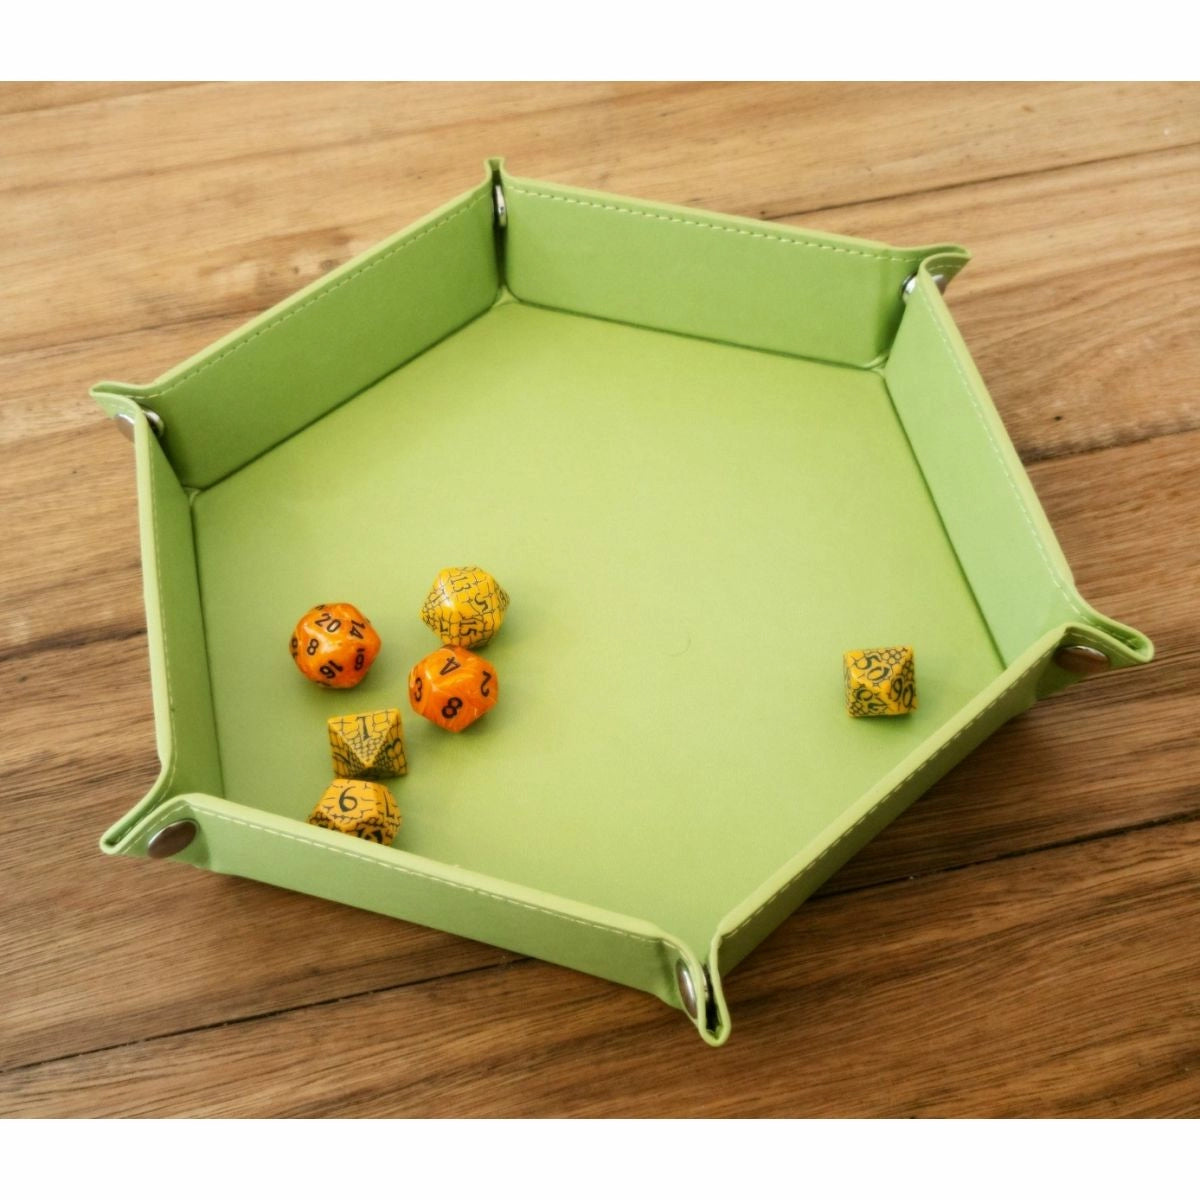 HEX 8 INCH DICE TRAY - GREEN